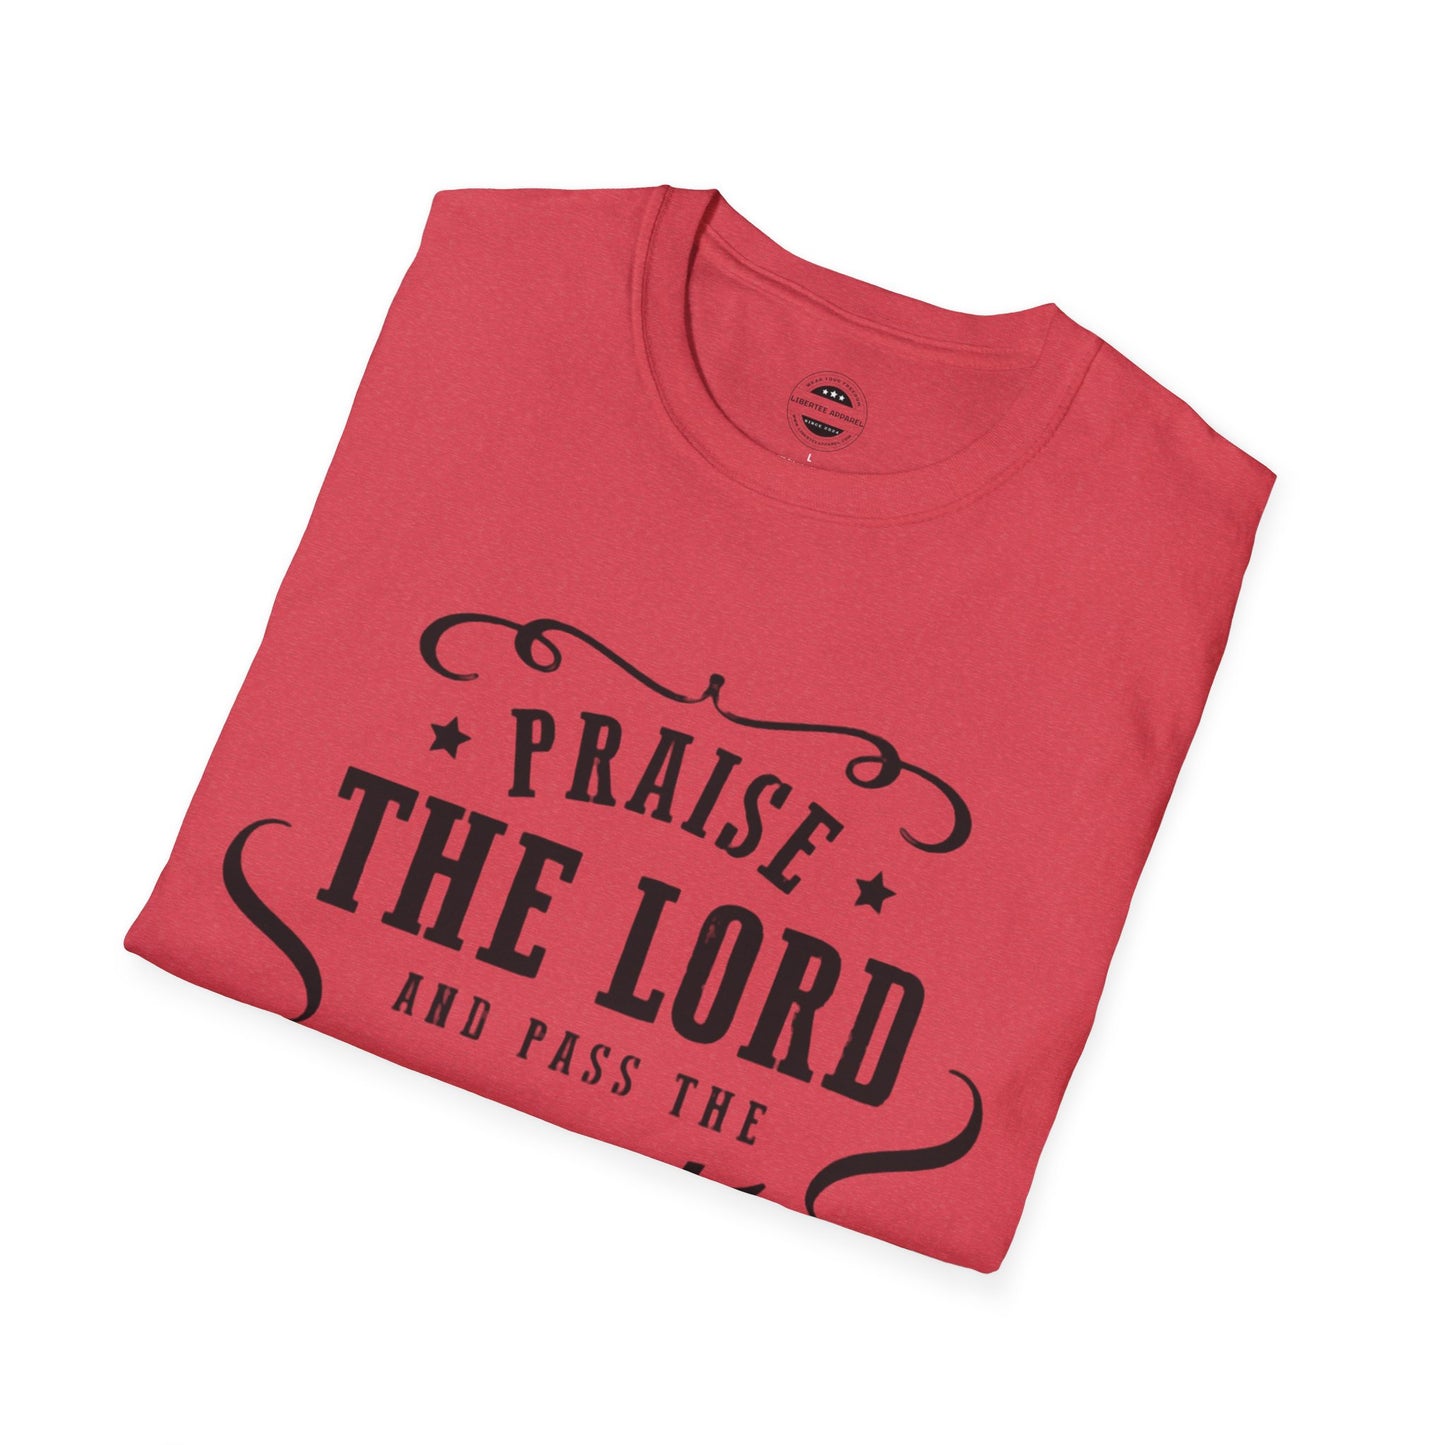 Praise the lord and pass the Whiskey Unisex Softstyle T-Shirt